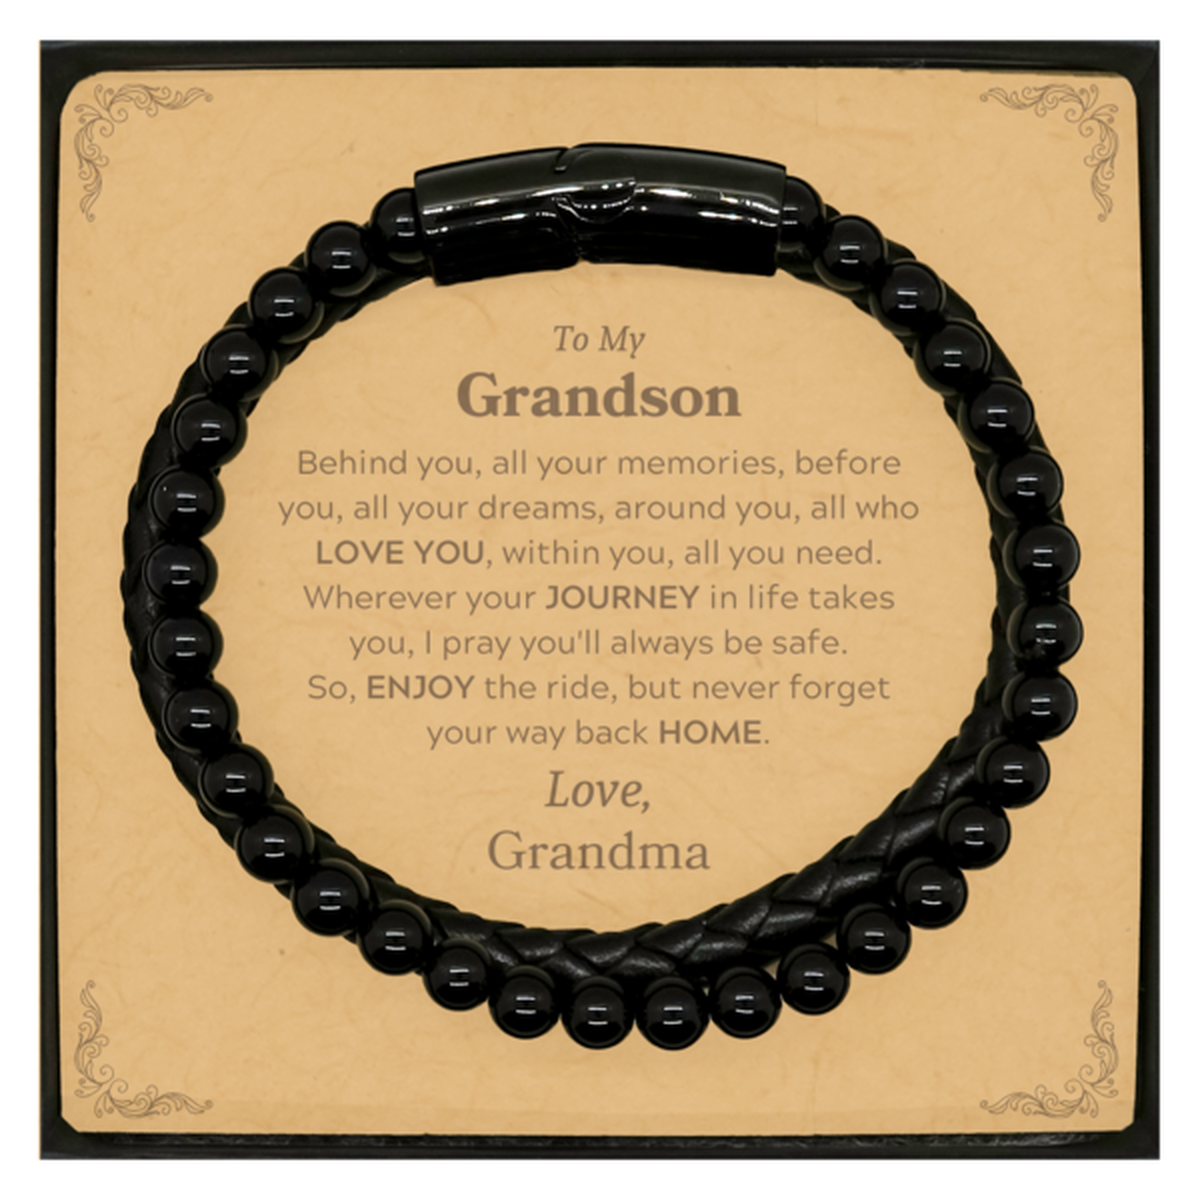 To My Grandson Graduation Gifts from Grandma, Grandson Stone Leather Bracelets Christmas Birthday Gifts for Grandson Behind you, all your memories, before you, all your dreams. Love, Grandma